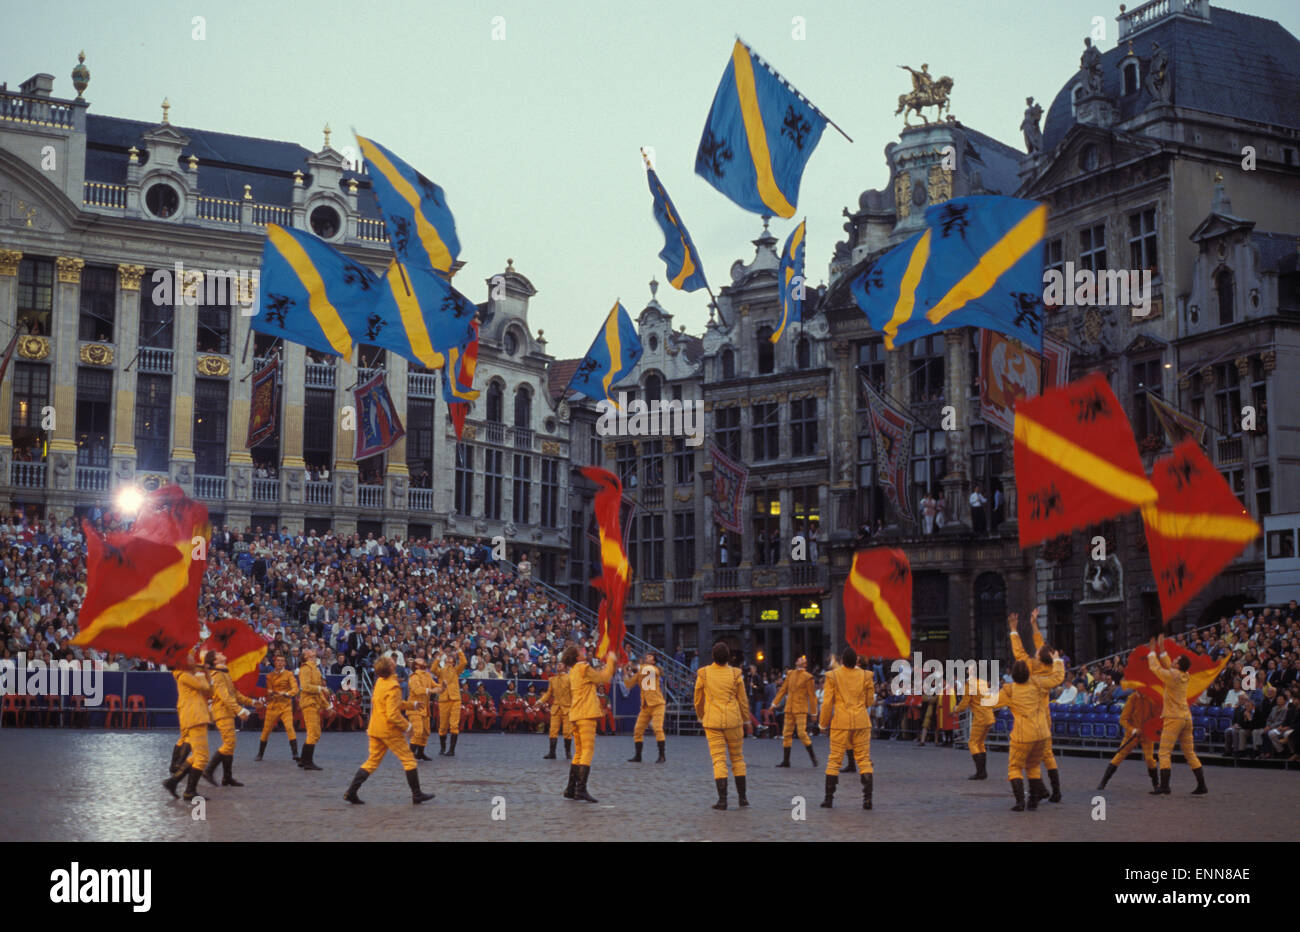 Europe, Belgium, Brussels, participants of the Ommegang festival at the Grand Place, flag-waver [The Ommegang was originally est Stock Photo